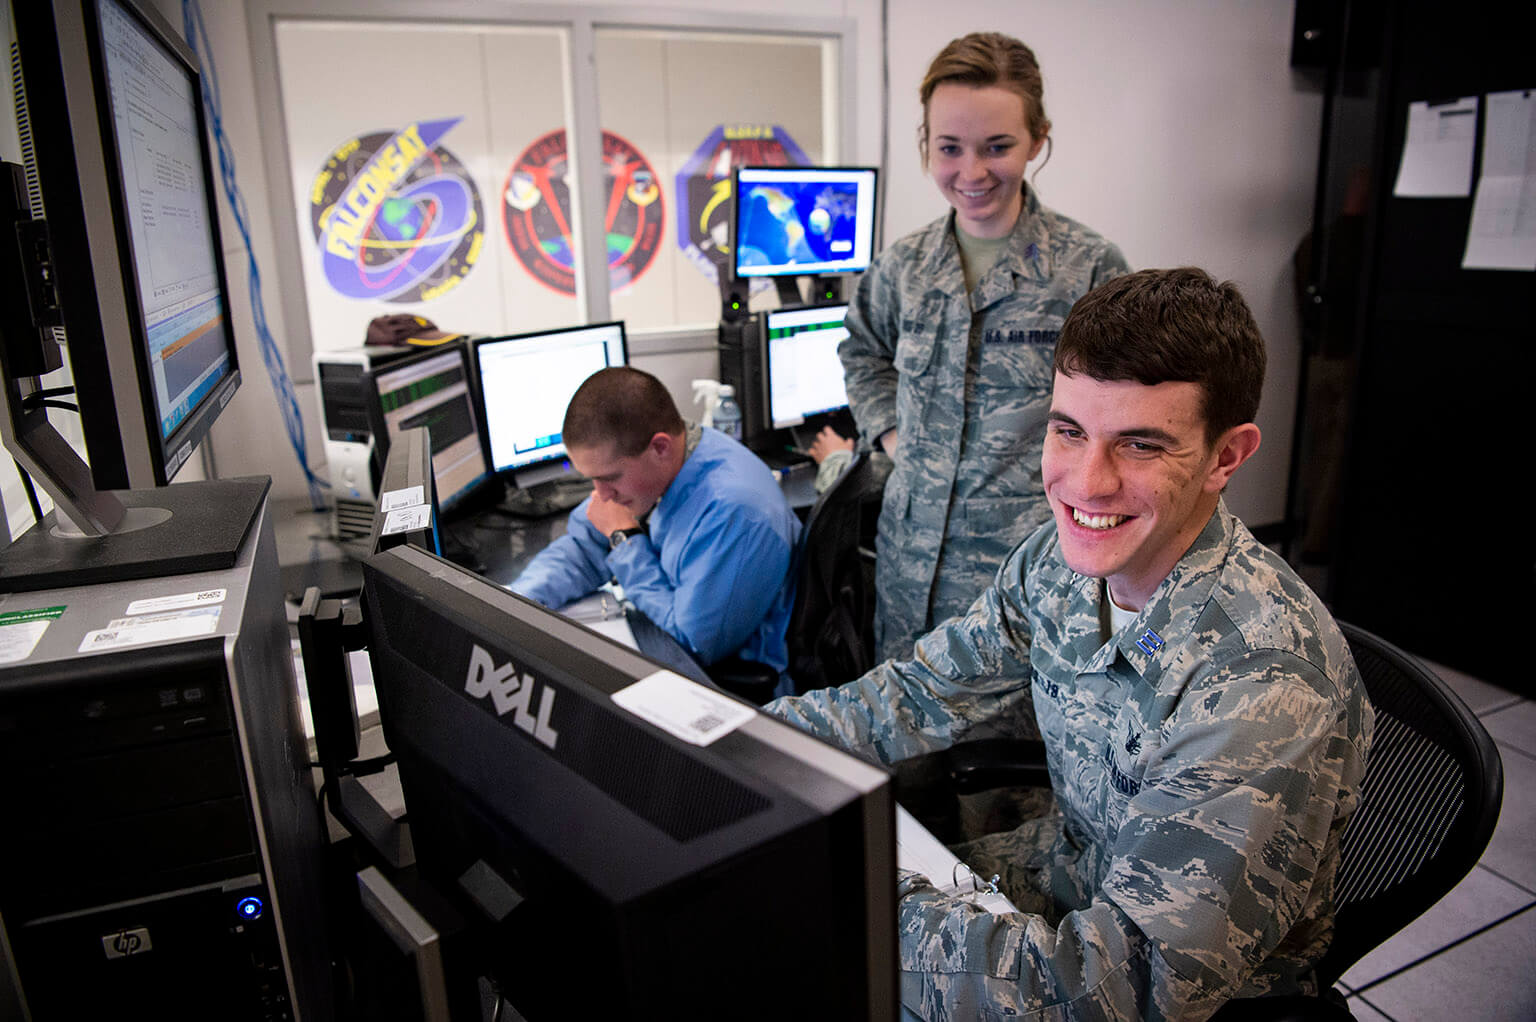 Cadets working with contact for the cadet-designed FalconSAT satellite